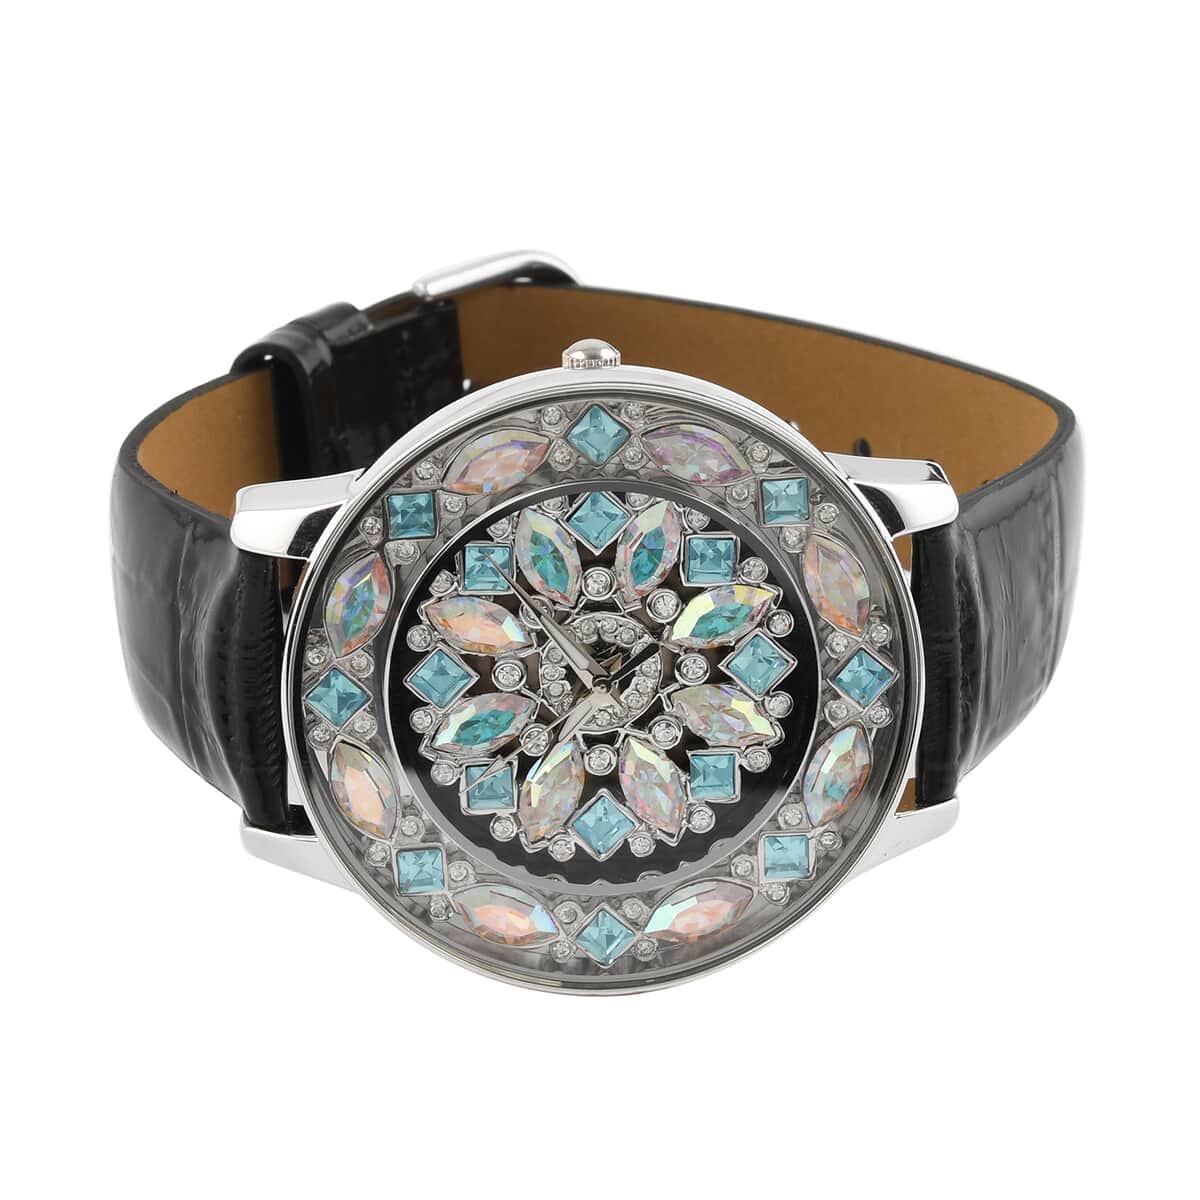 ADEE KAYE Lafayette Austrian Crystal Japanese Movement Watch with Genuine Leather Strap in Blue (45mm) image number 2